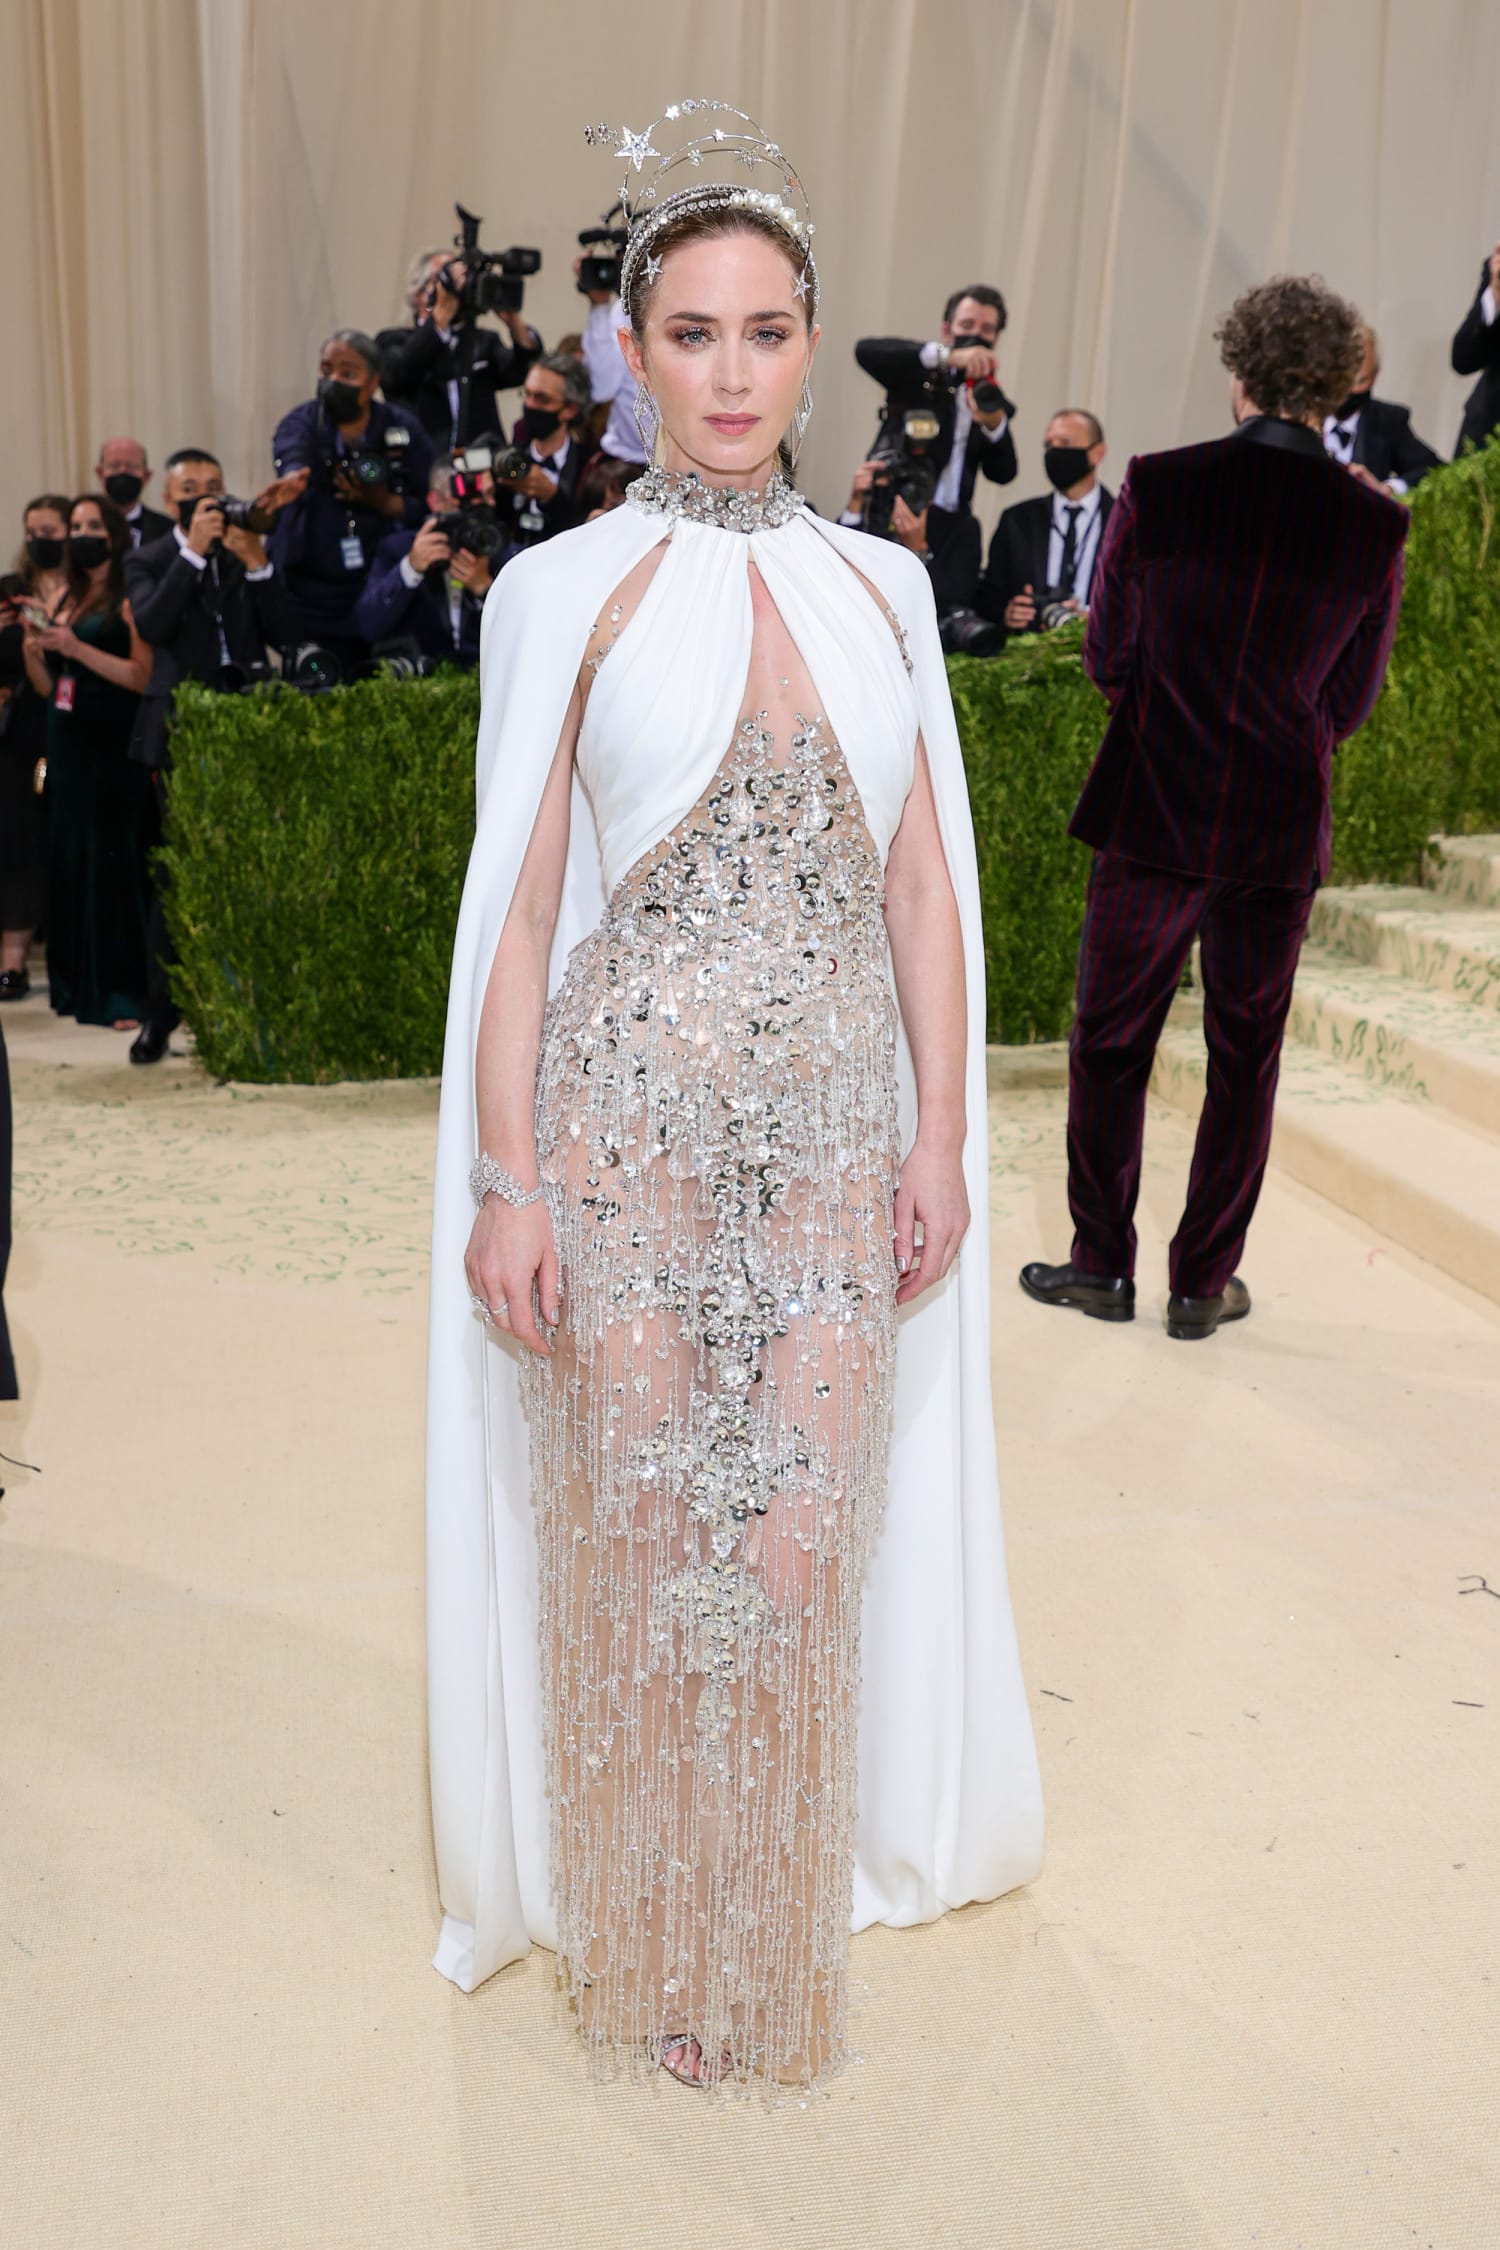 Met Gala 2021 See All The Best-dressed Celebrities From The Red Carpet Here